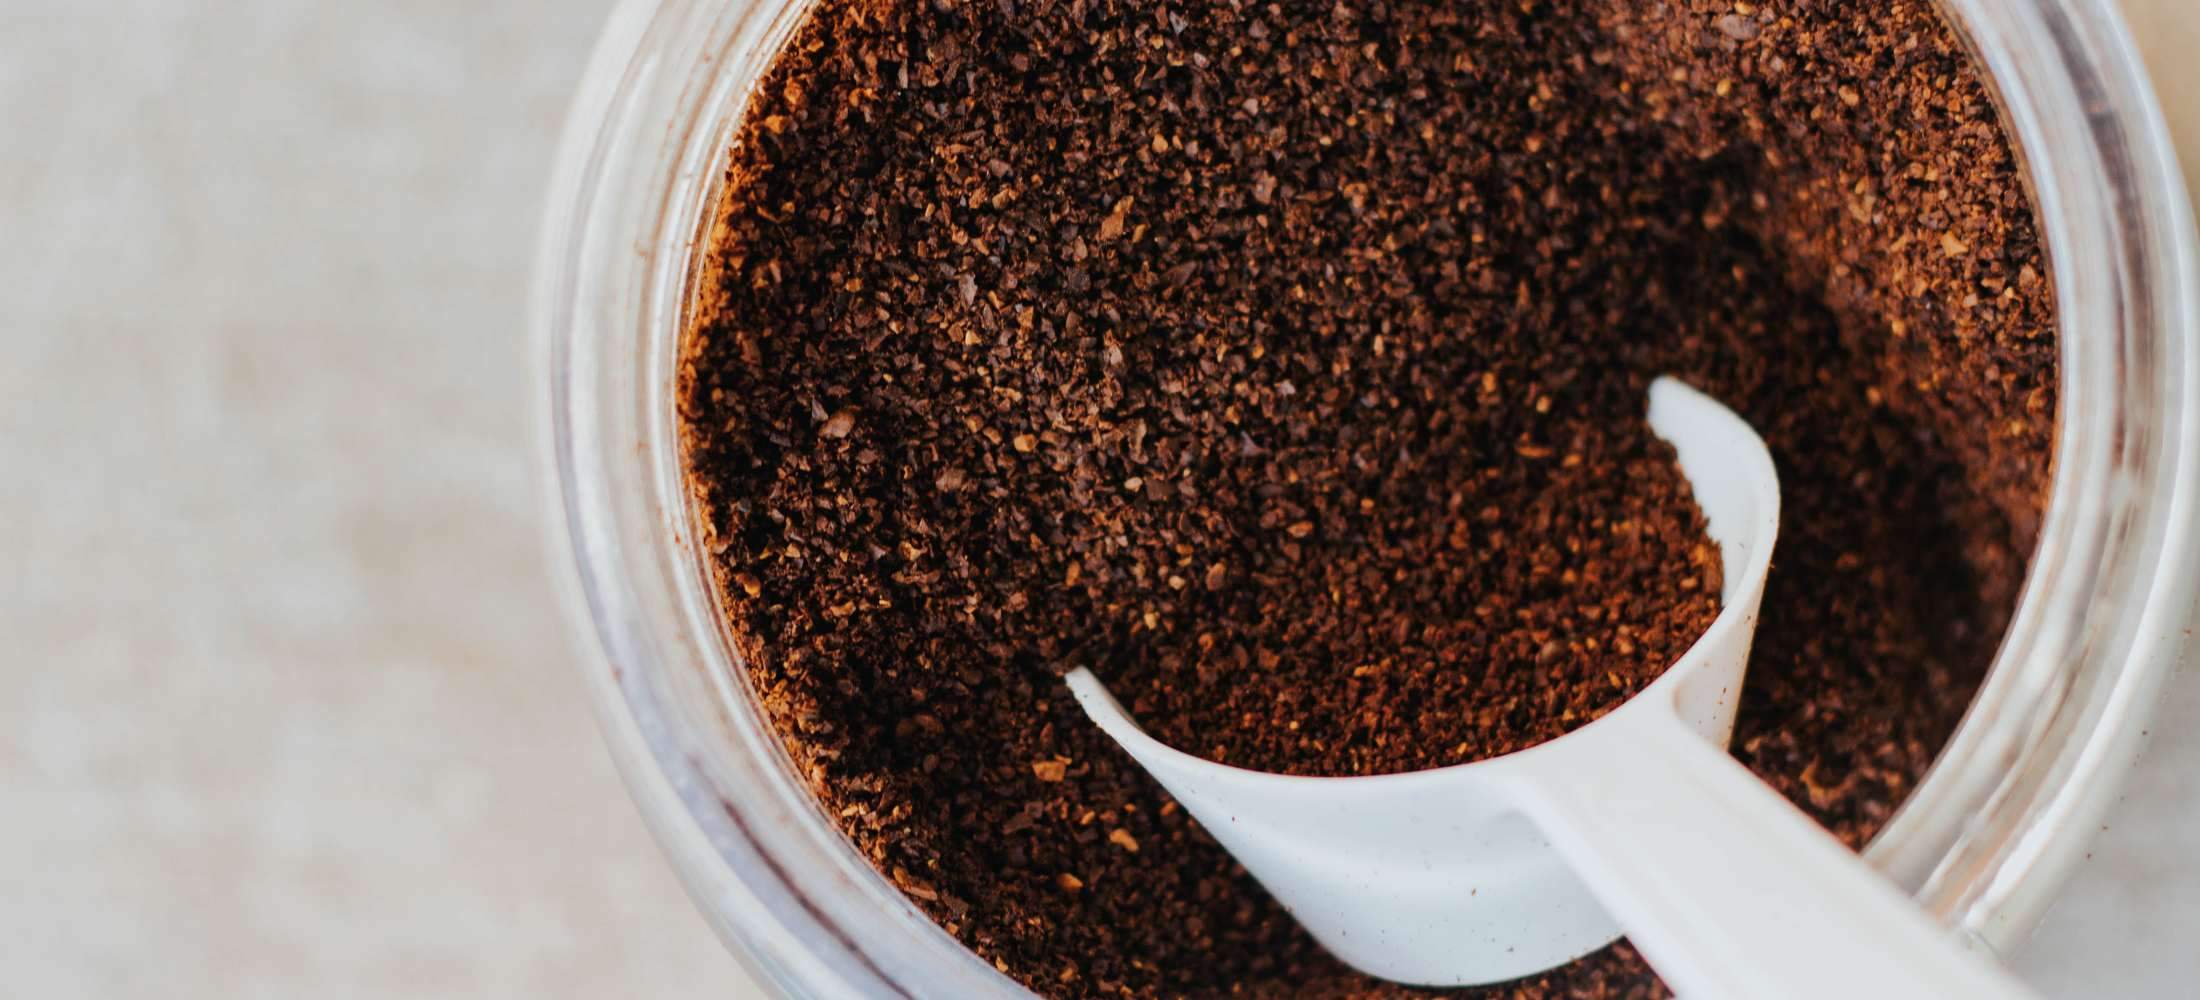 Confused About How to Grind Your Coffee? Here’s a Helpful Guide